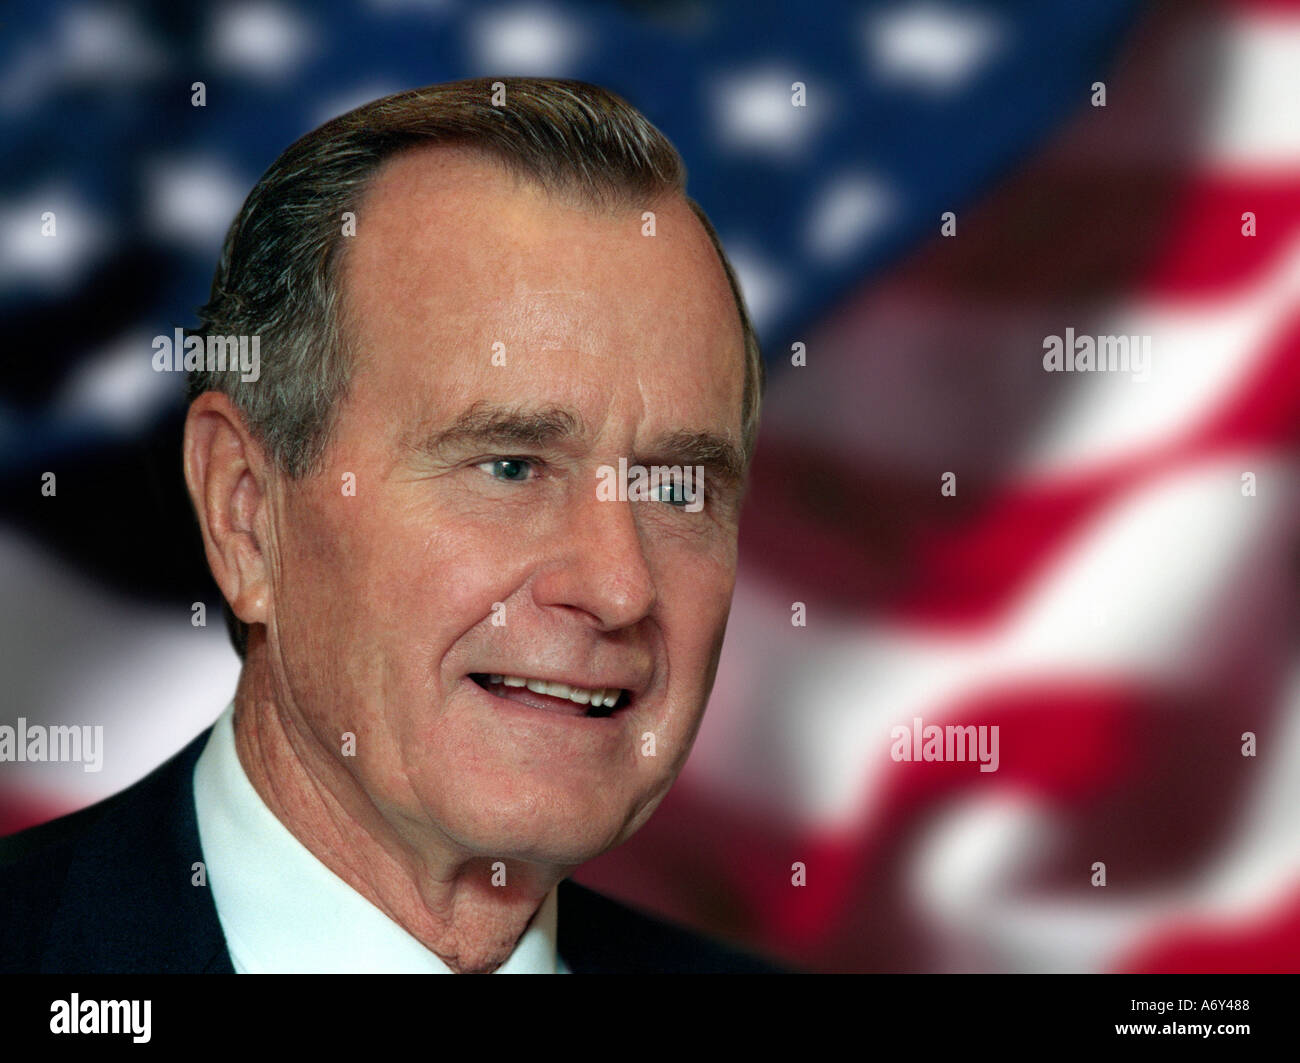 Archive commissioned portrait of former President George H W Bush with American stars and stripes flag behind Stock Photo